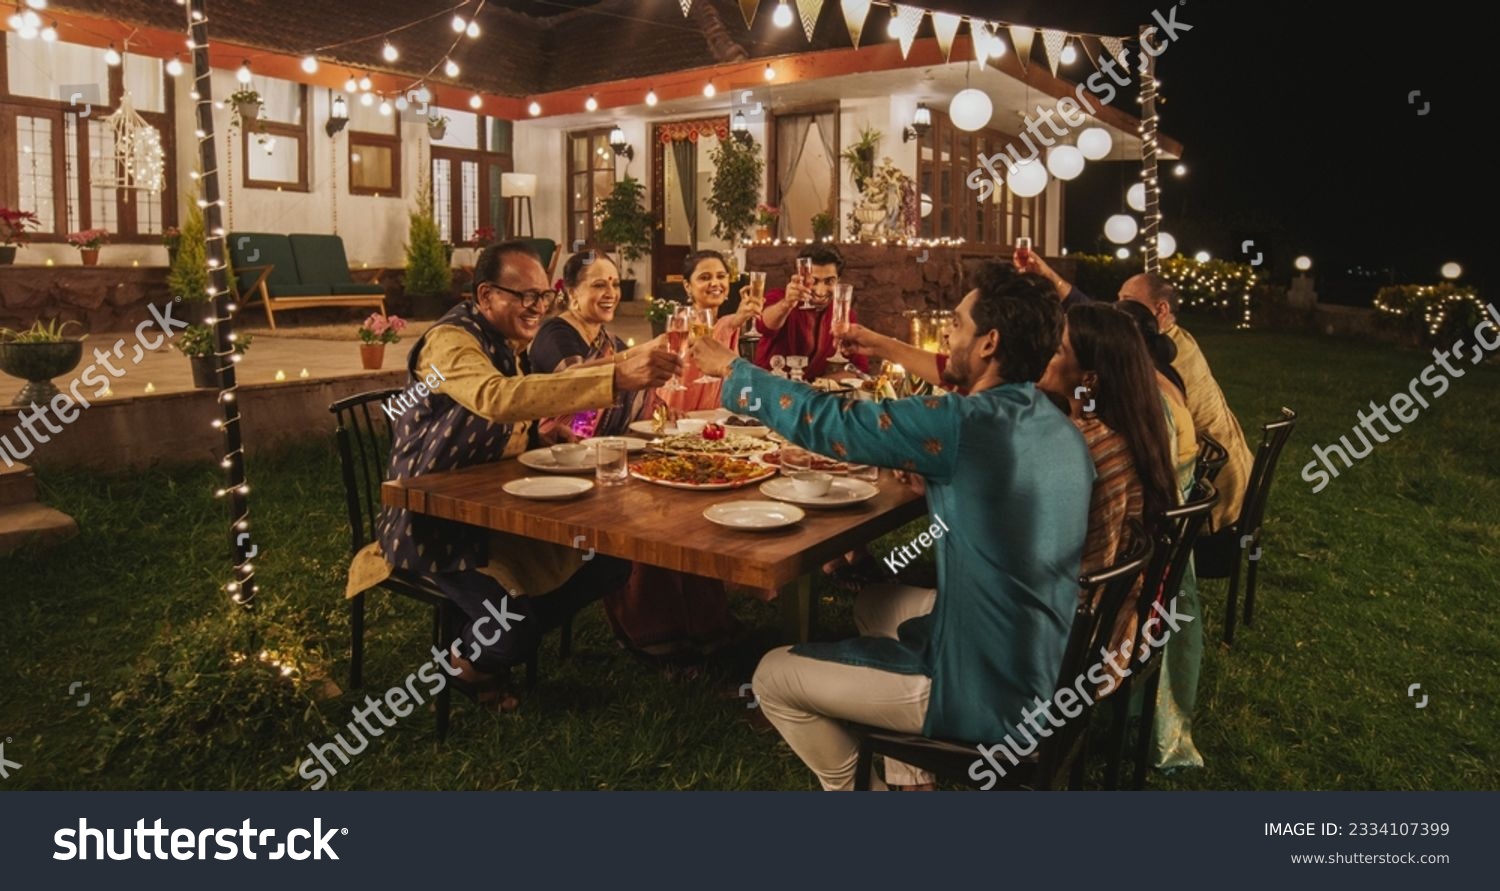 Big Indian Family Celebrating Diwali: Family Gathered Together on a Dinner Table in a Backyard Garden Full of Lights. Group of Adults Having a Toast and Raising Glasses on a Hindu Holiday #2334107399